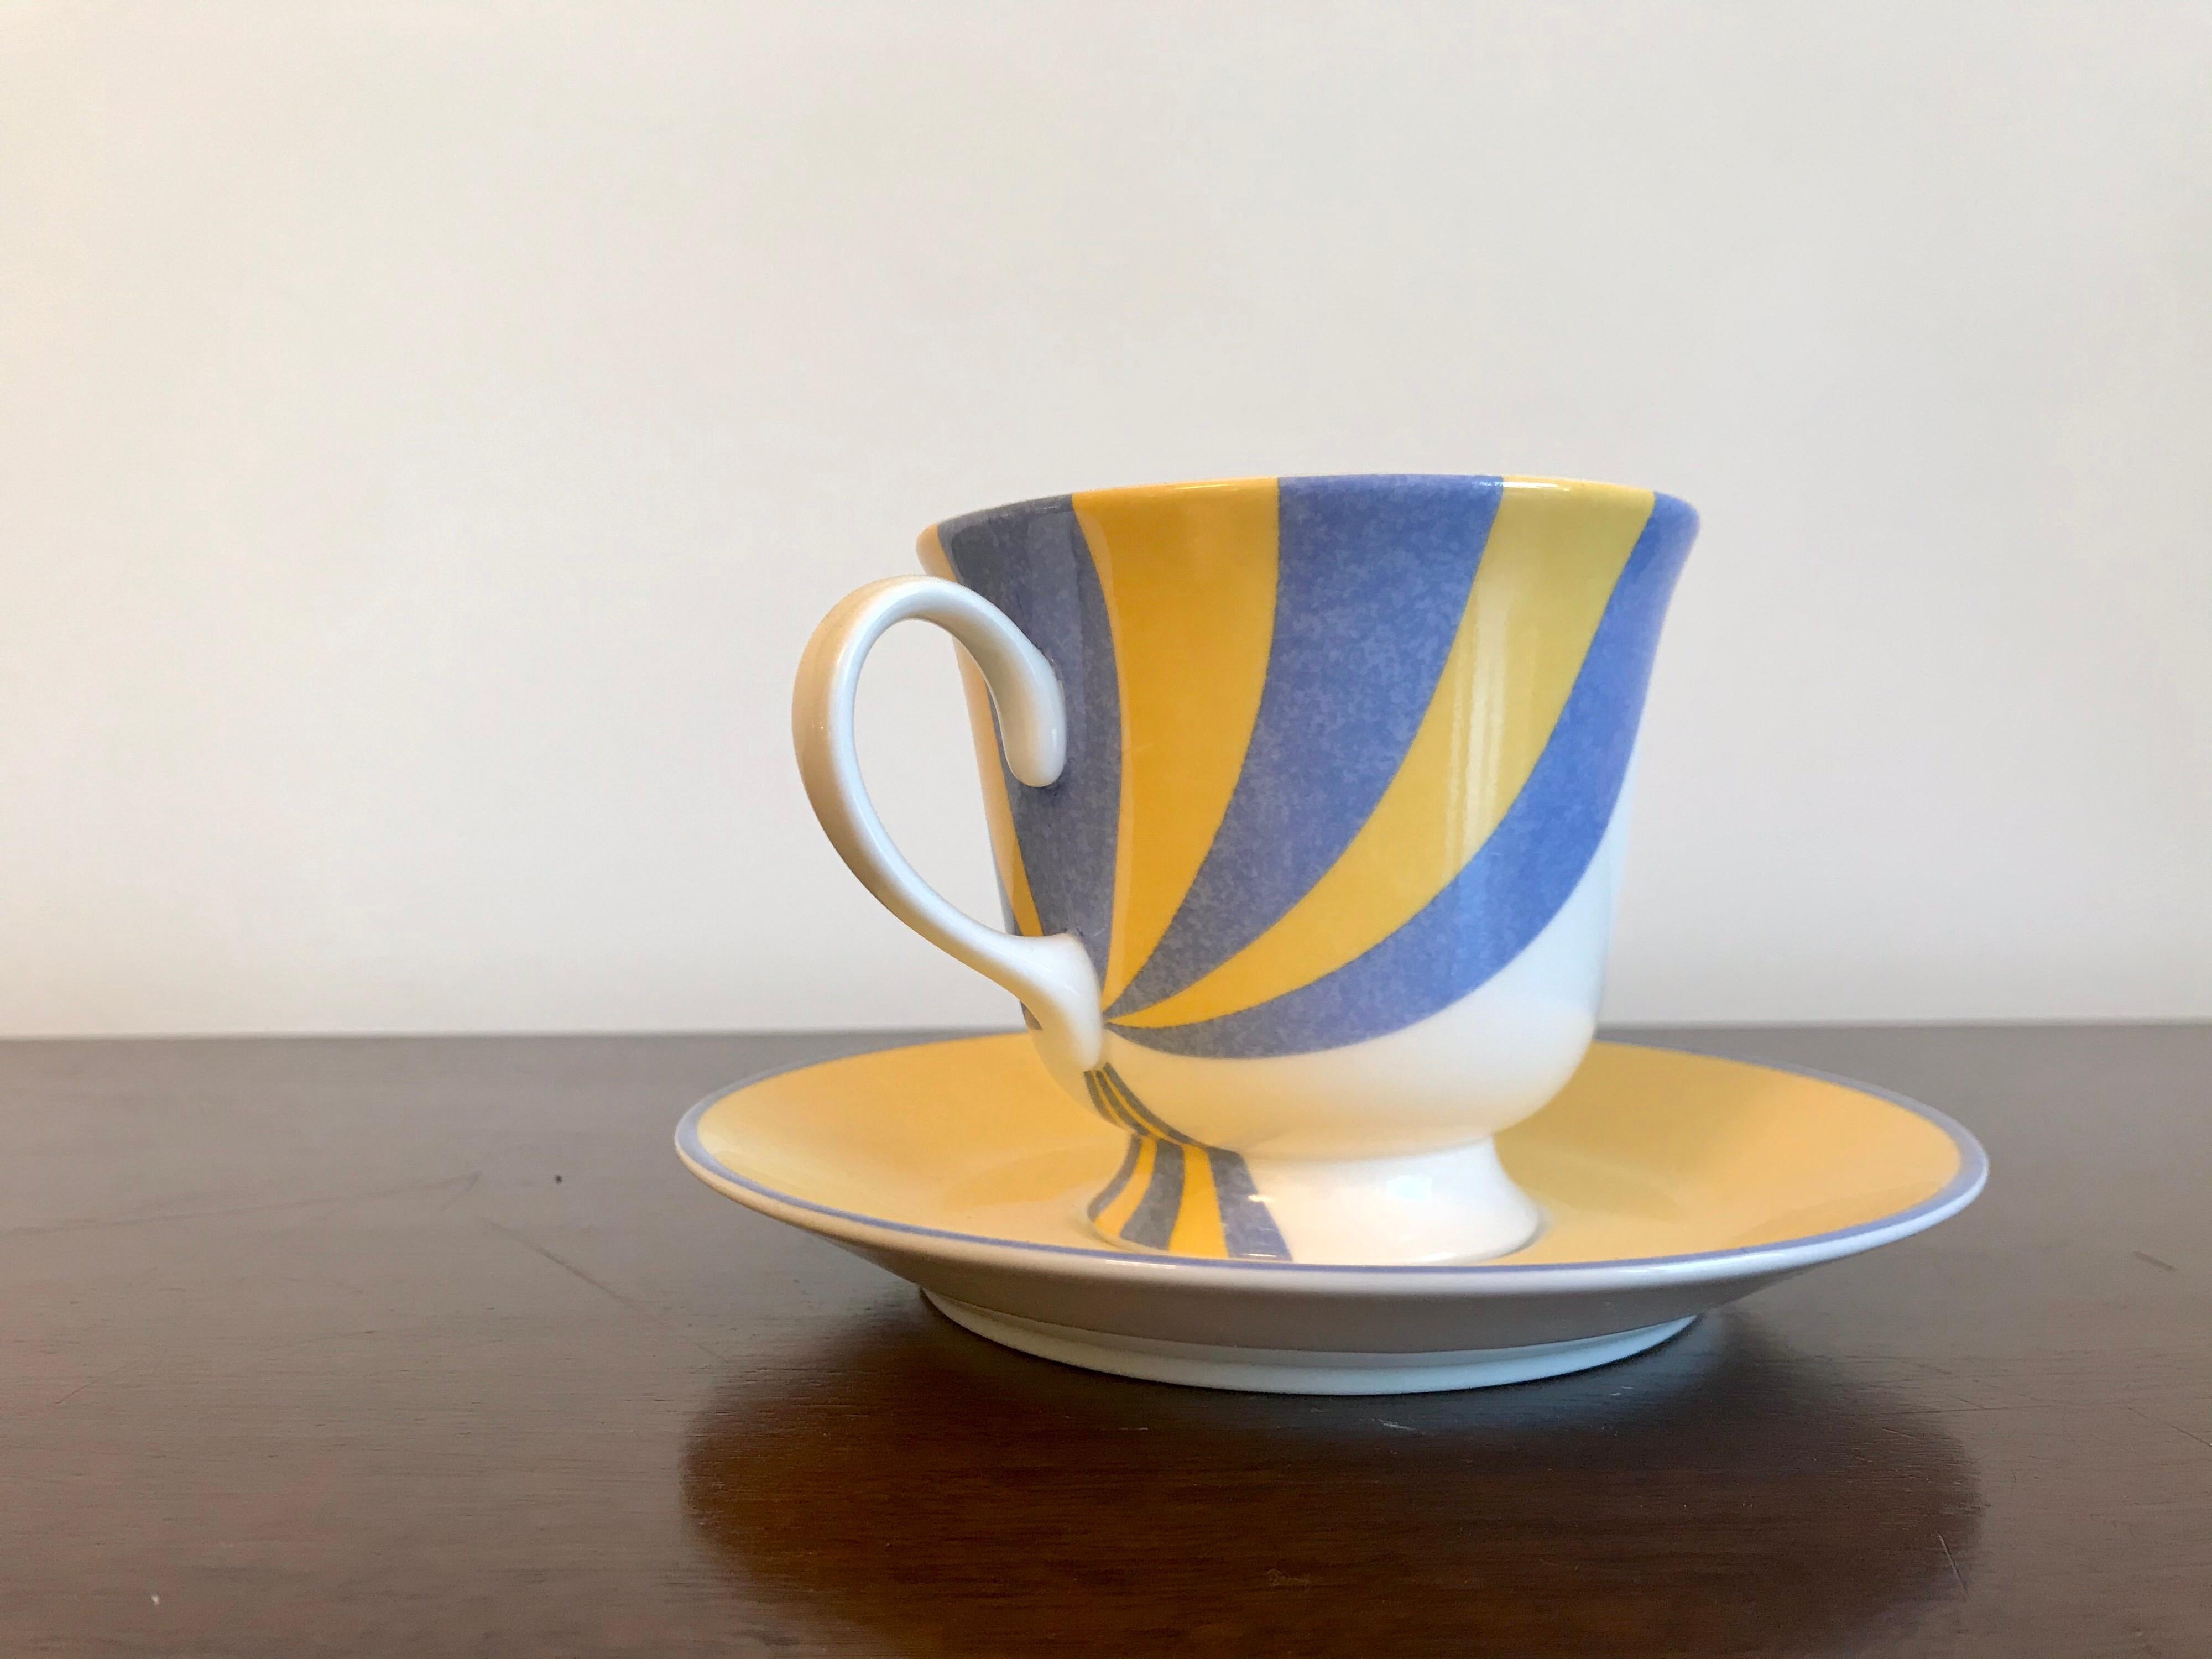 Molded Hermes Porcelain 'Circus' Cup and Saucer